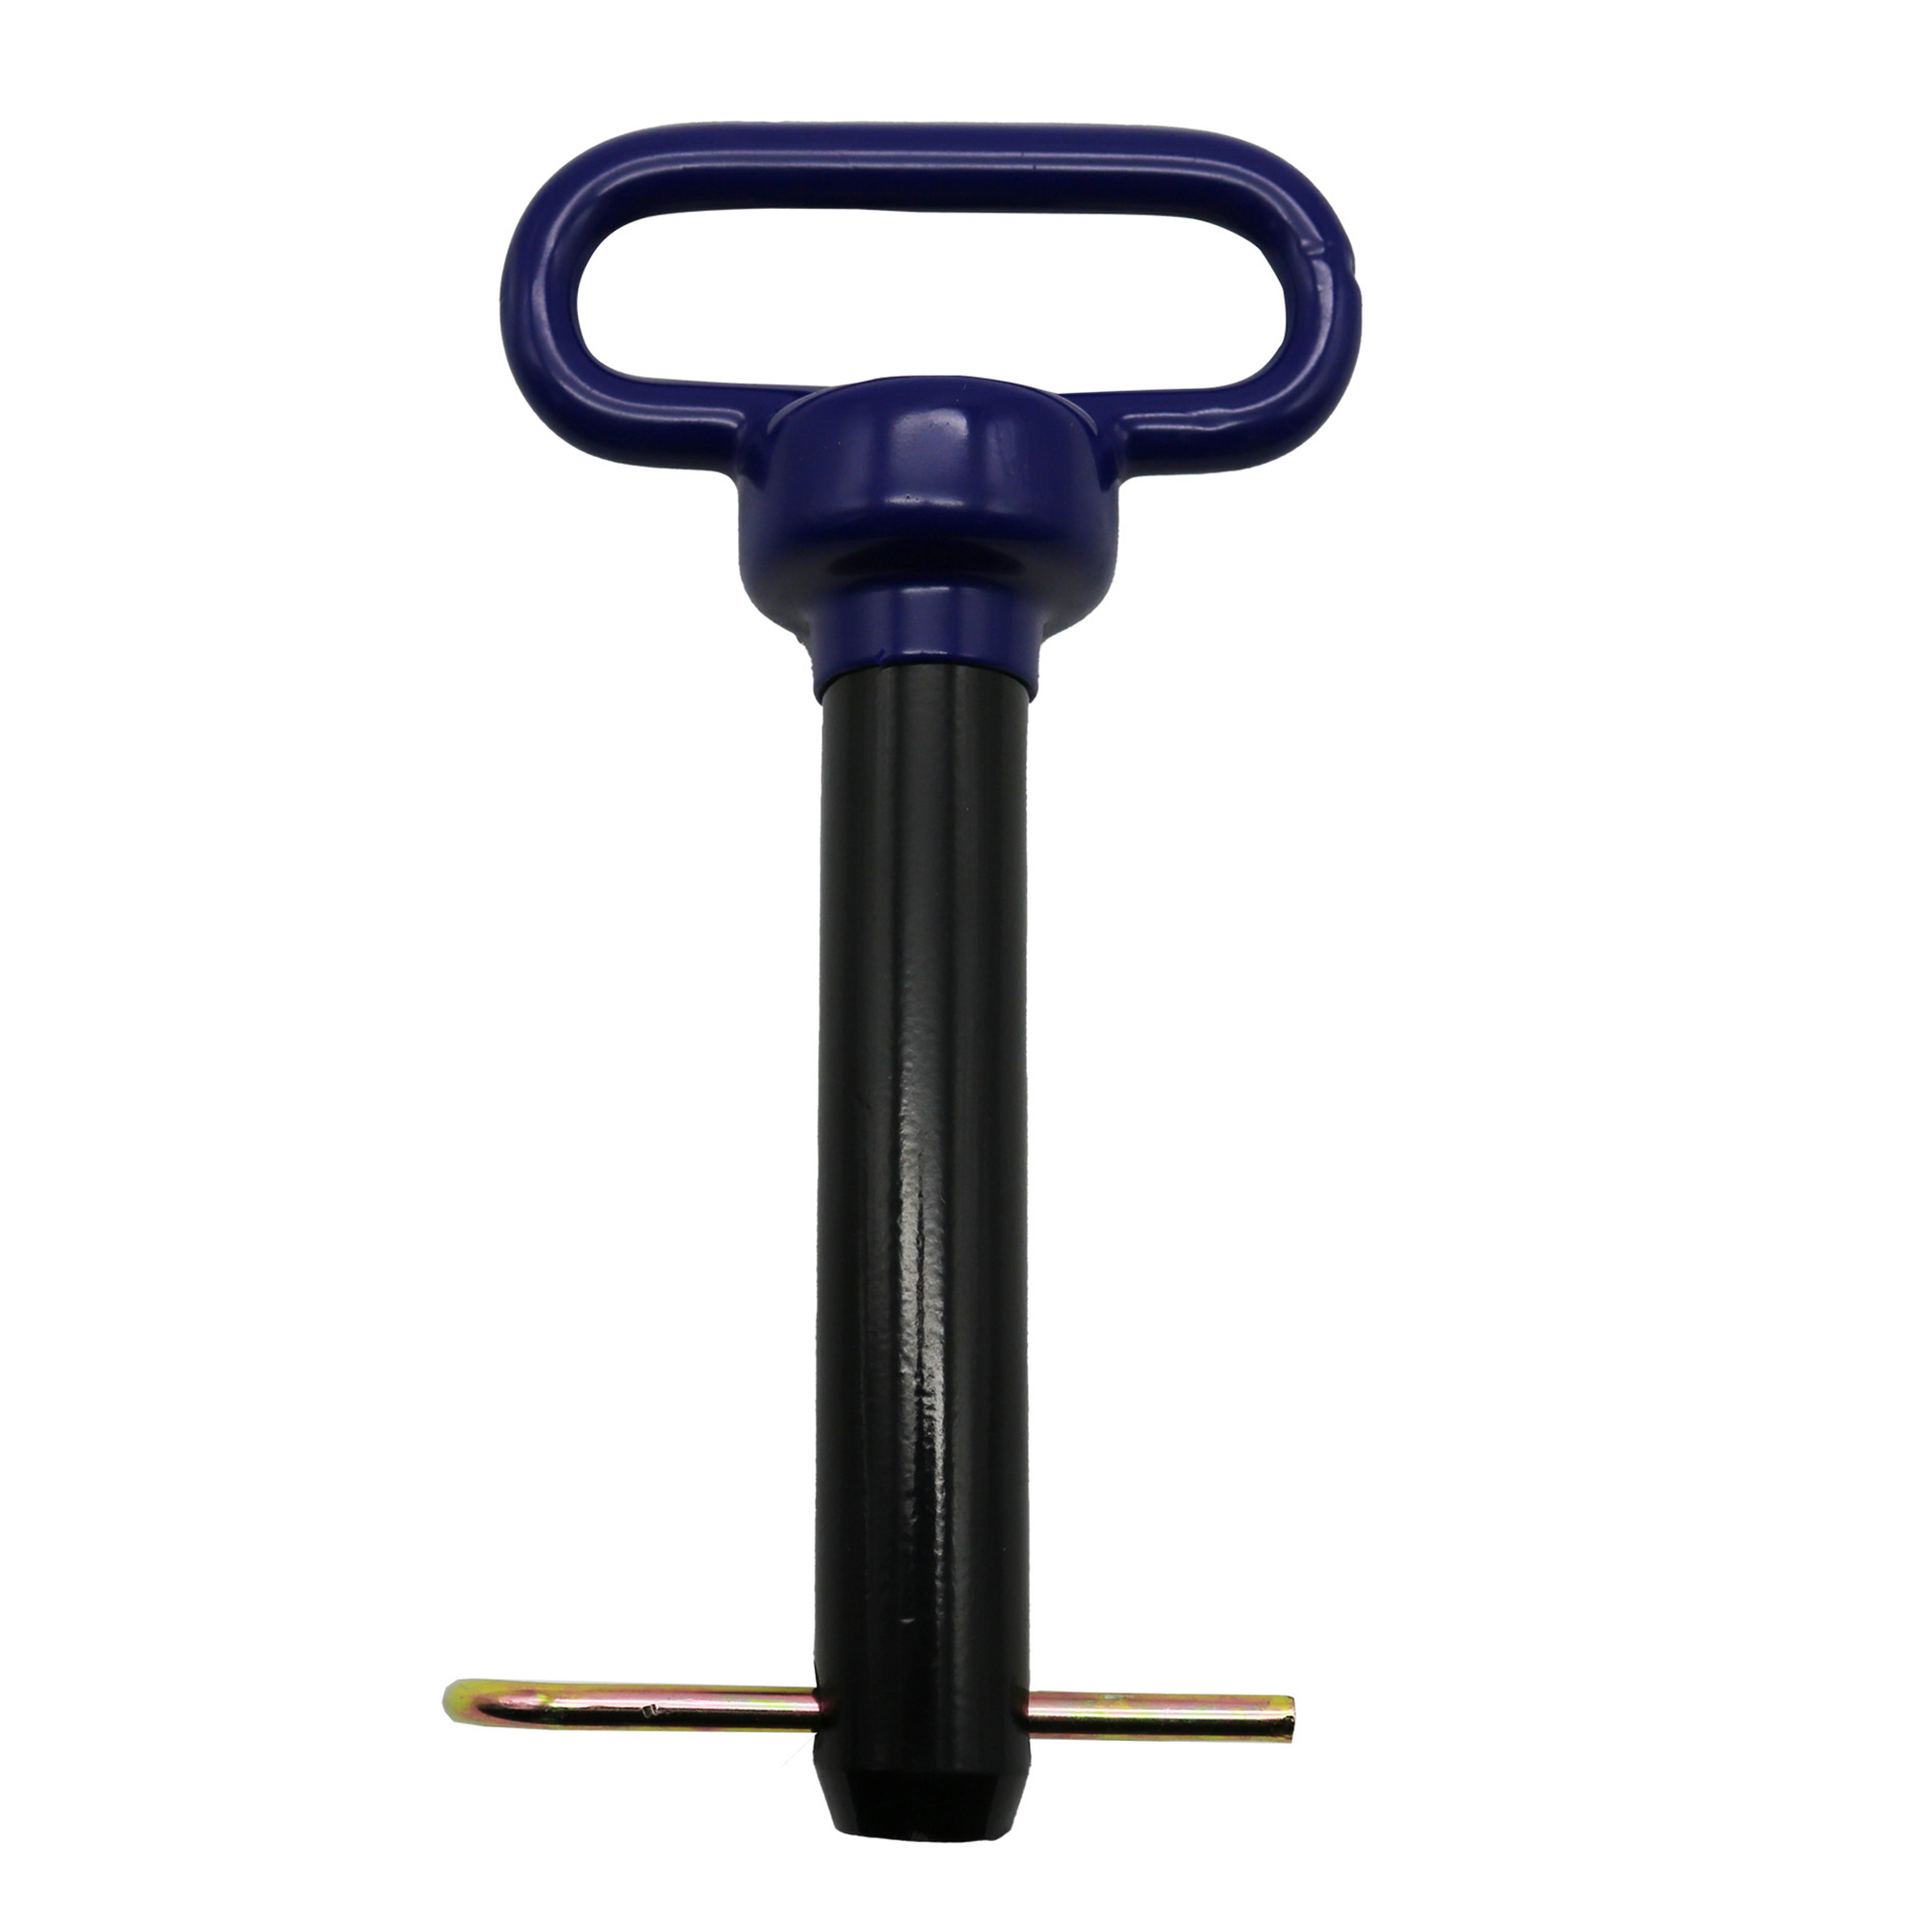 Braber Equipment, Grade 8 Forged Hitch Pin, 1Inch Diameter, Usable Length 4.75 in, Model 714HPBLU